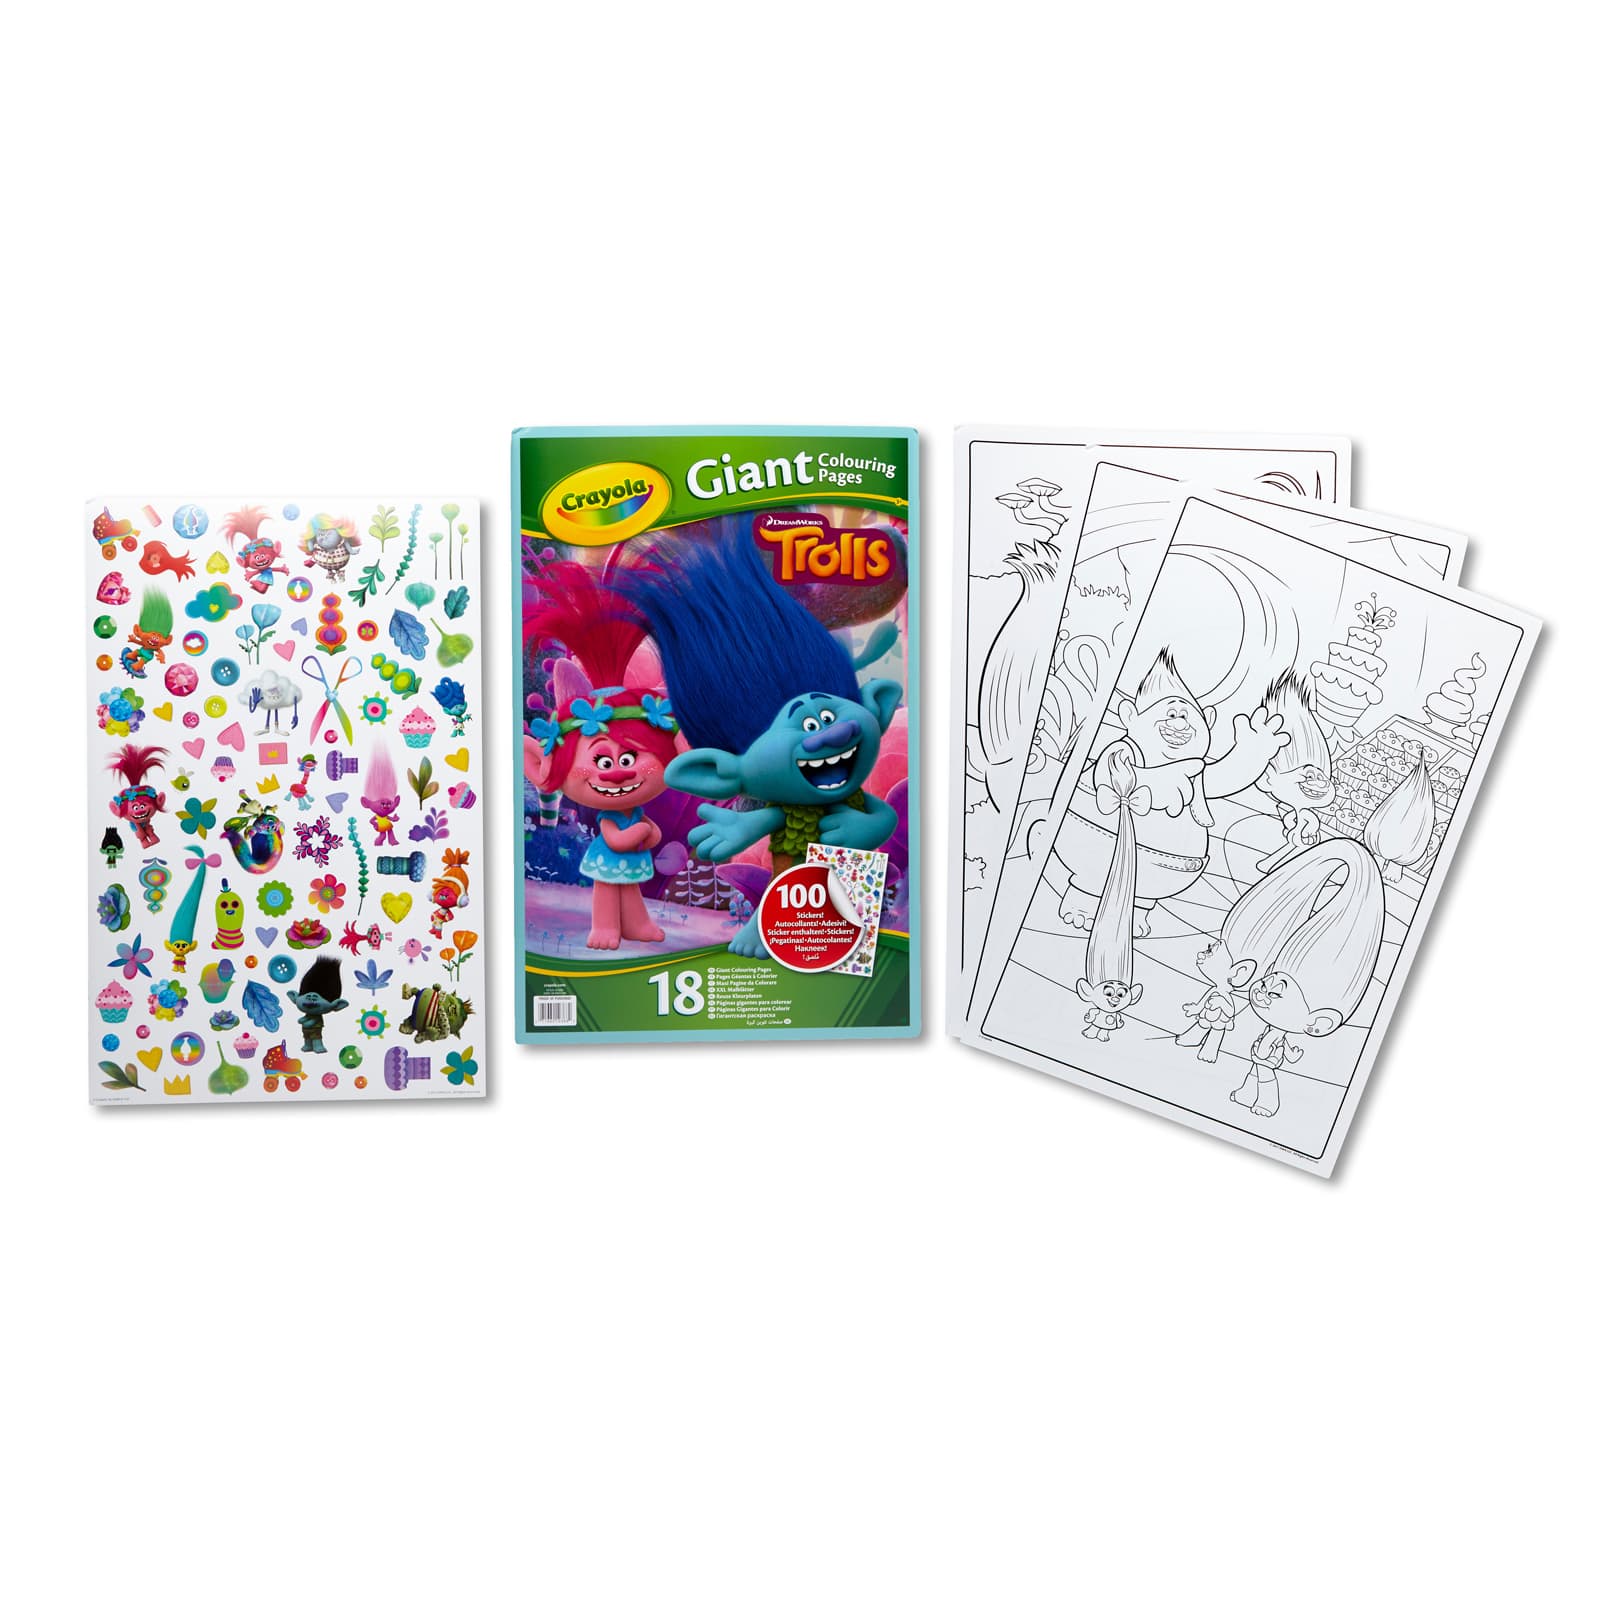 Trollls 3 Giant Coloring Pages - 18 Pages, Crayola.com